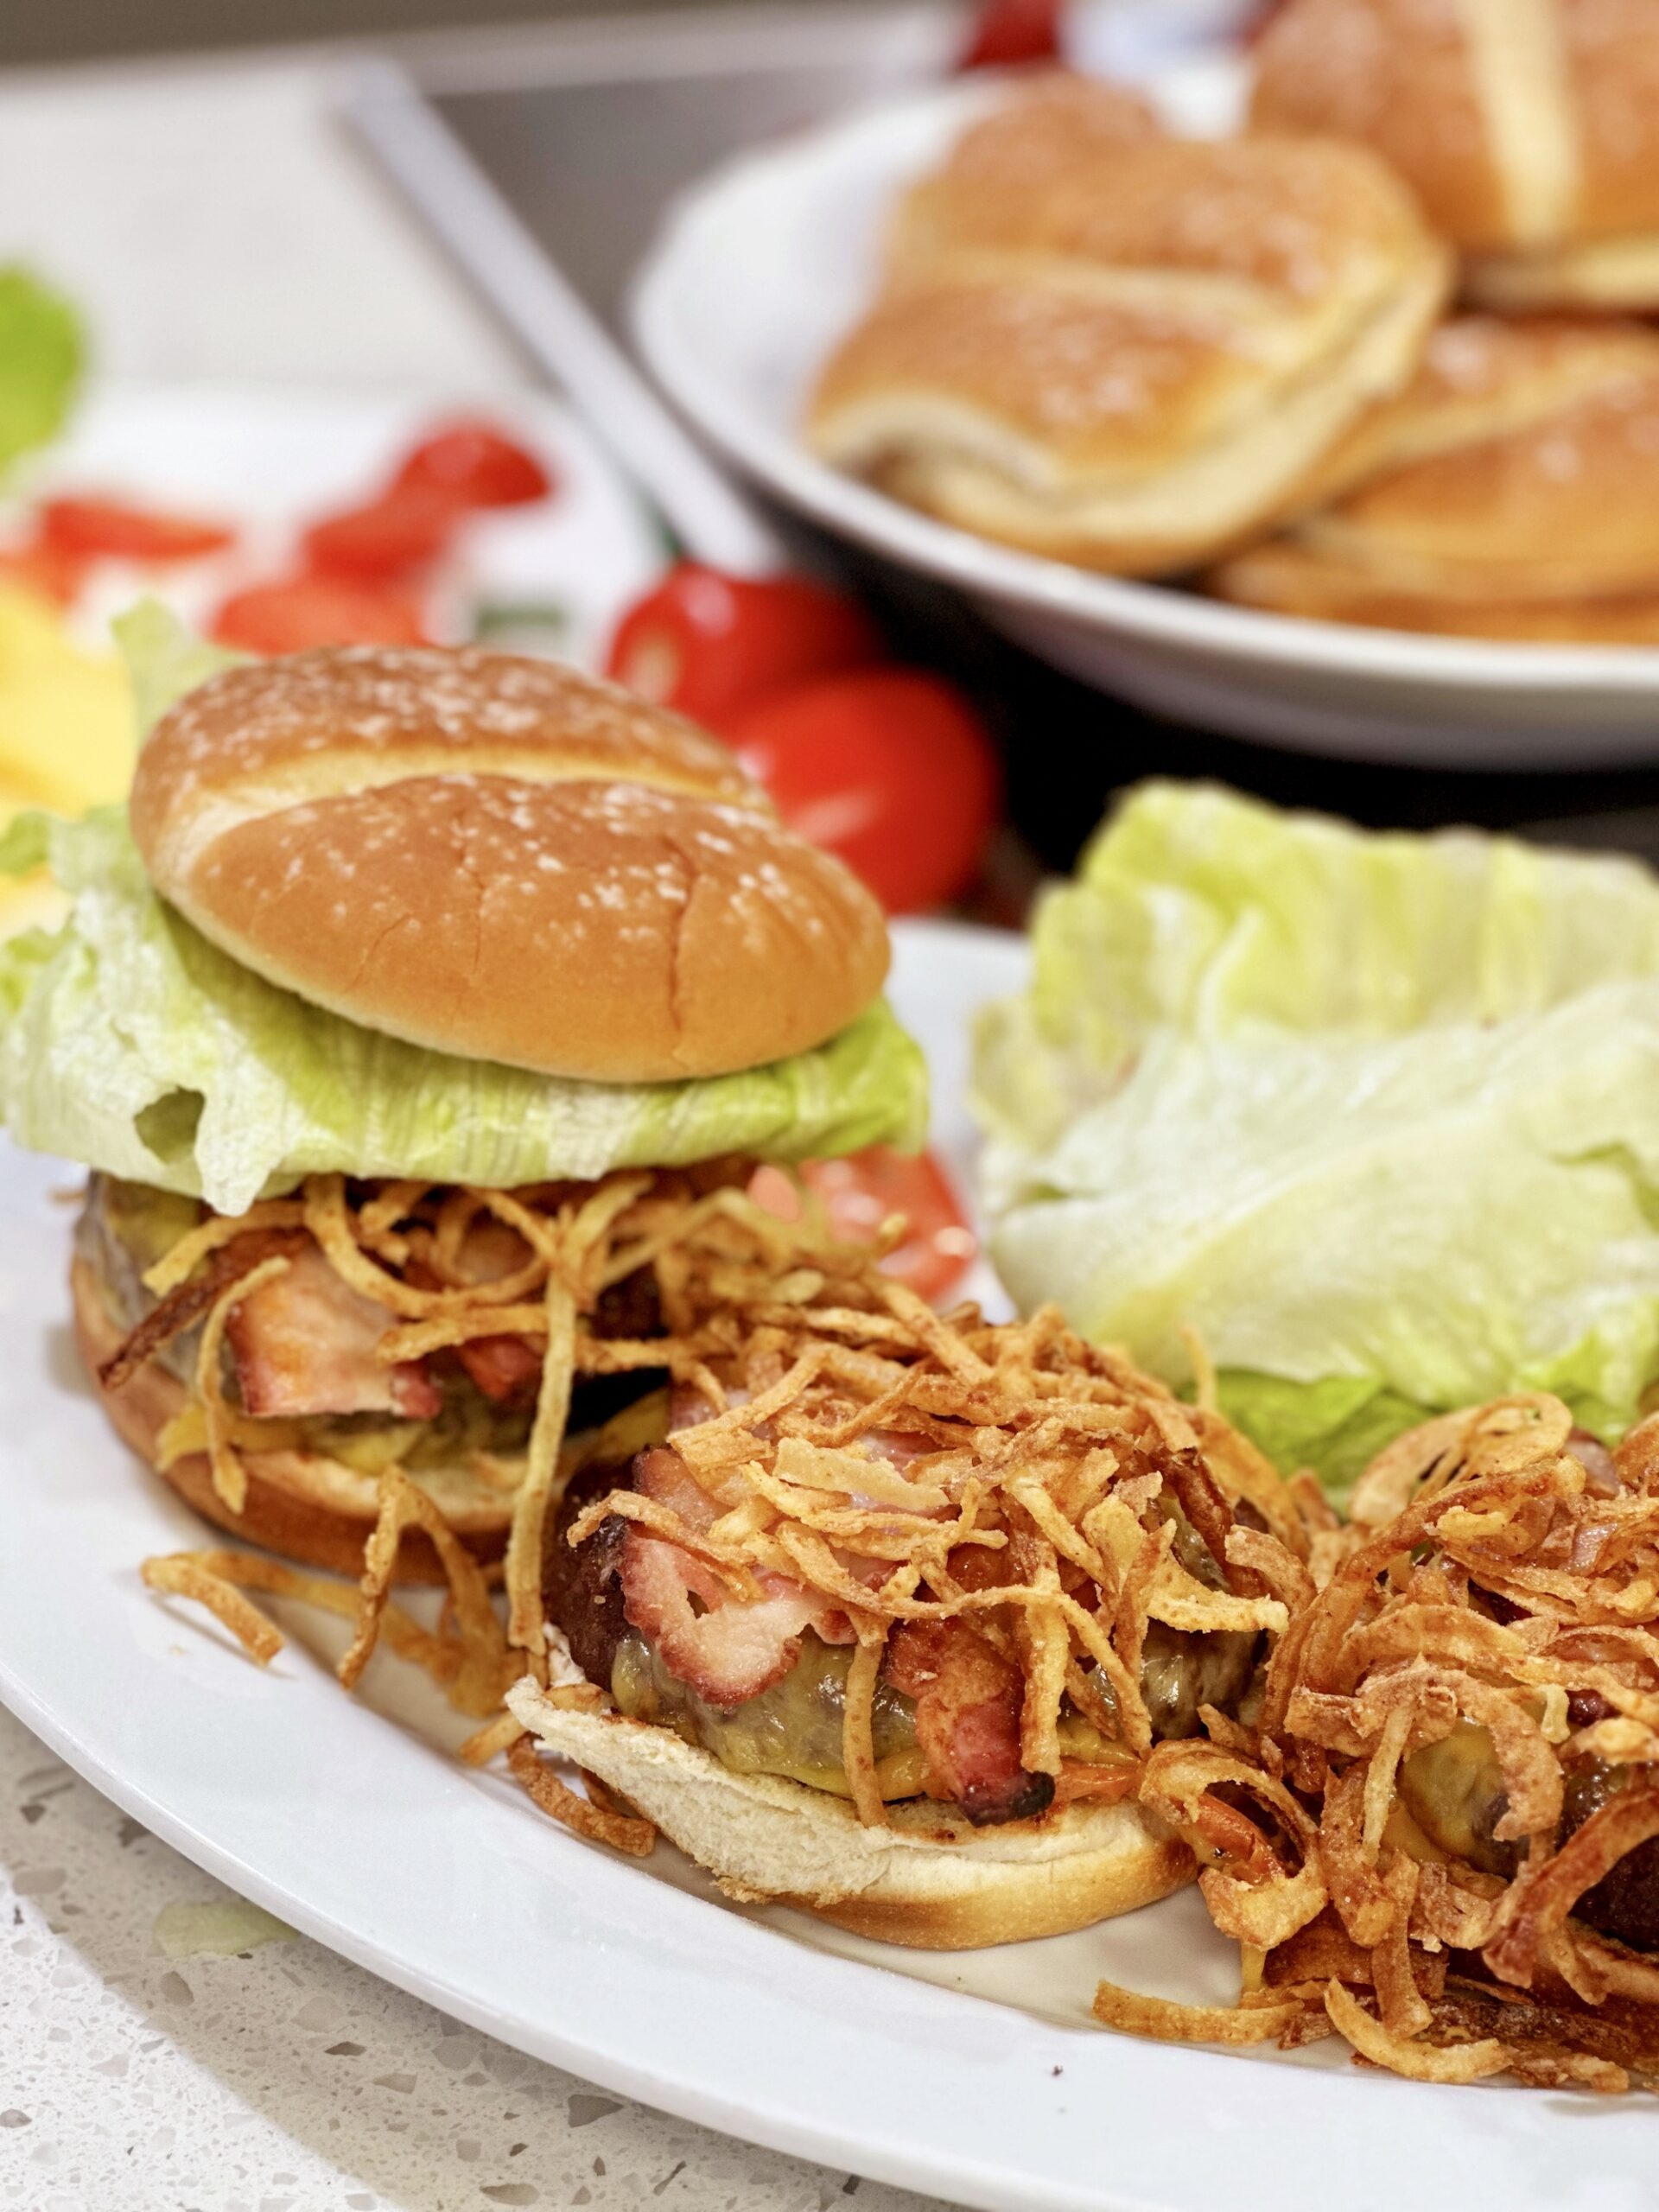 Skillet Bacon Cheeseburger with Crispy Fried Onions – Leite's Culinaria